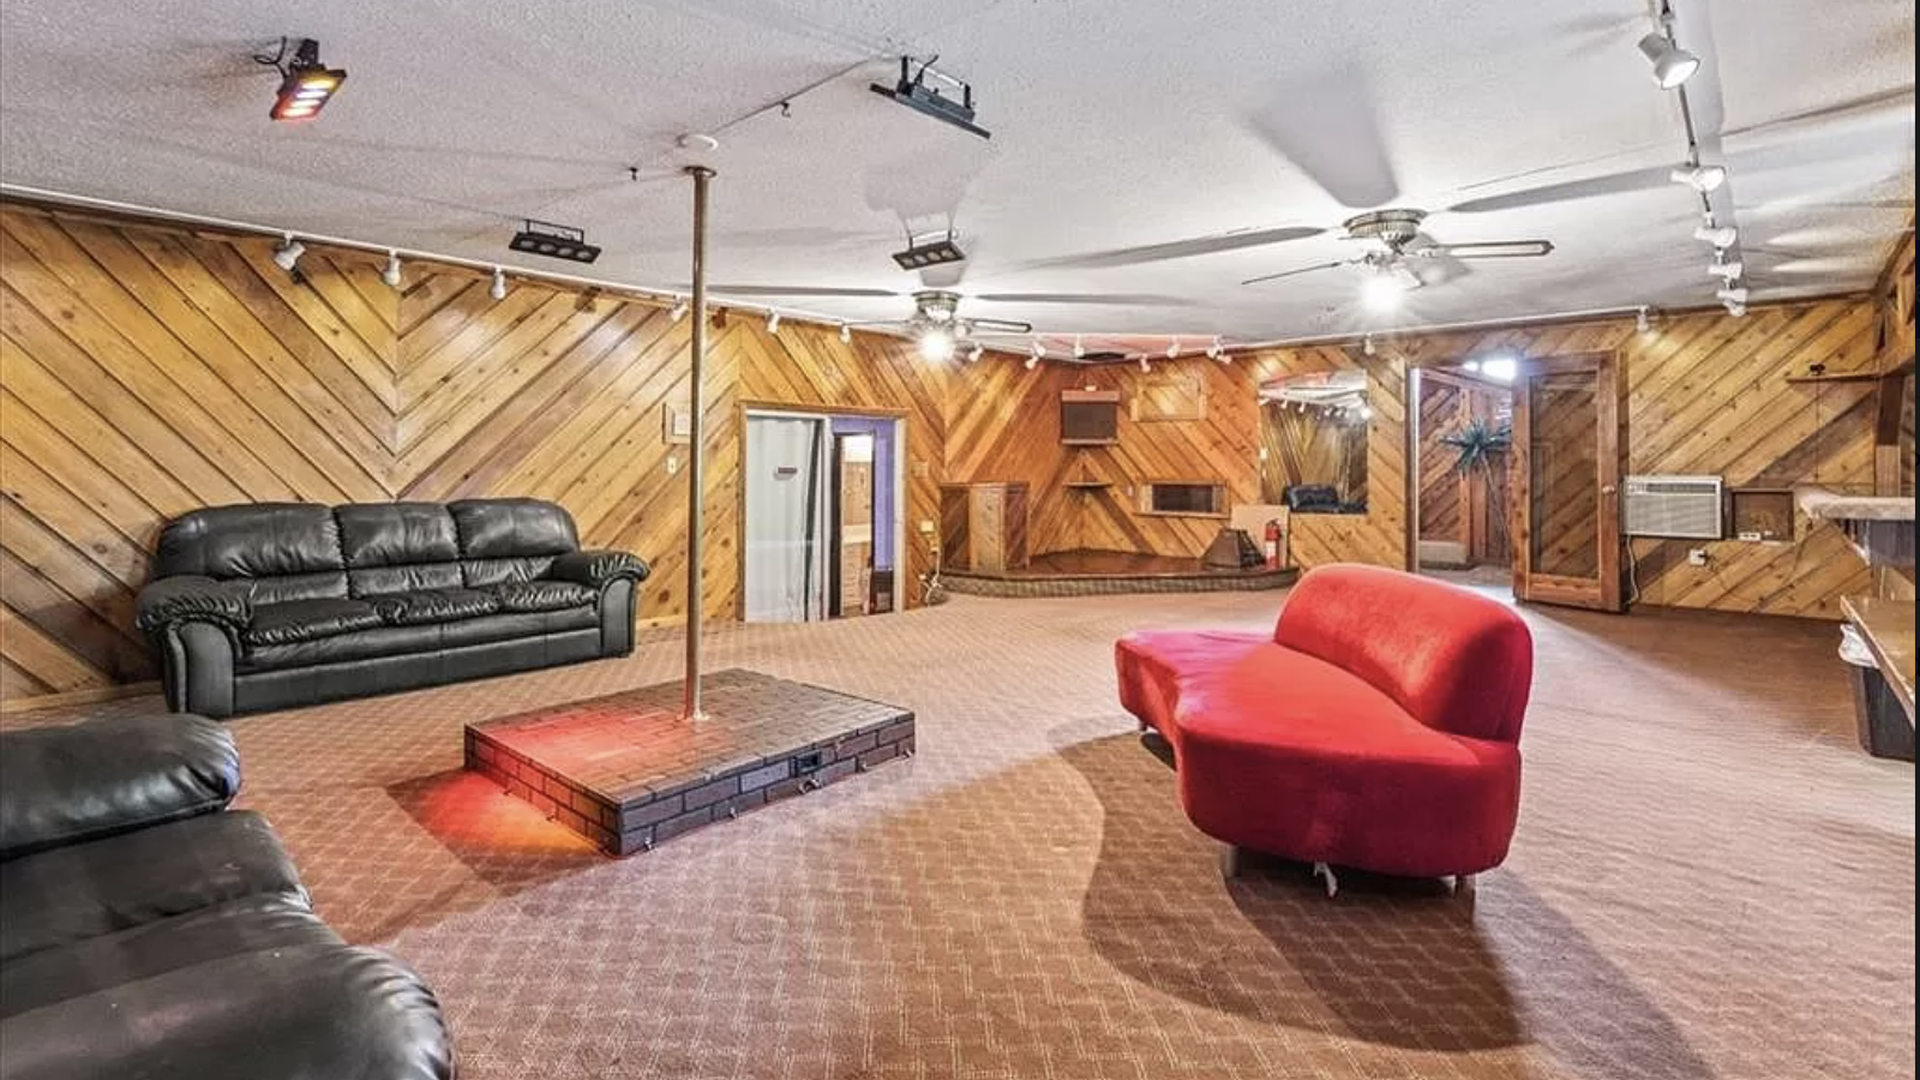 A wooden-paneled room and three couches facing a stripper pole.